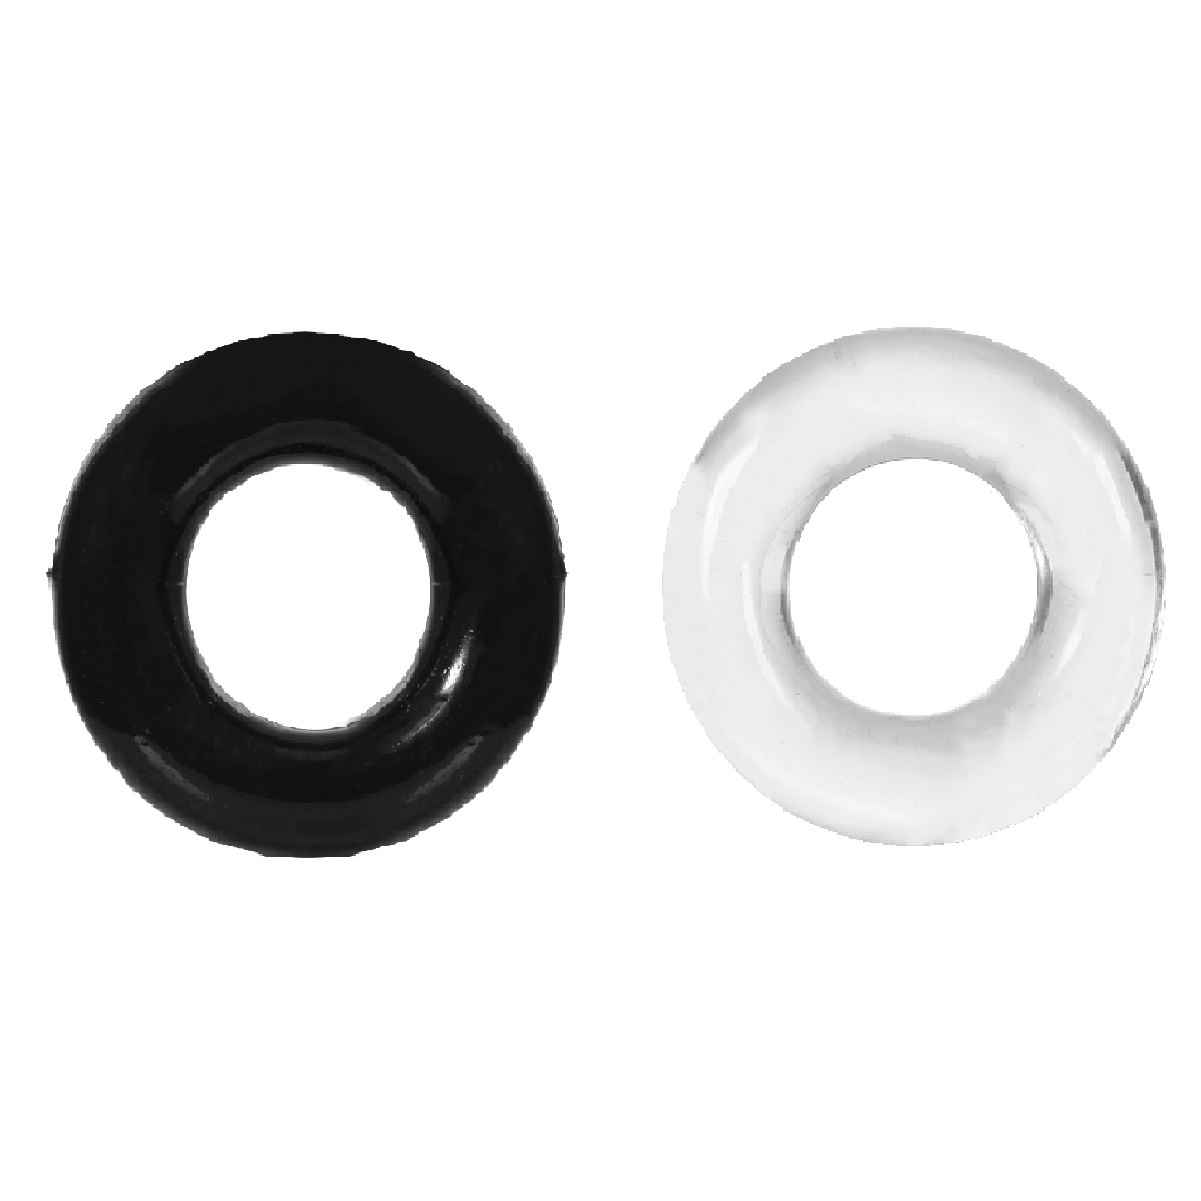 20 Cock Ring Extra Delay Durable Lock Black and Clear Colour Mixed|UK SELLER|GCAP027